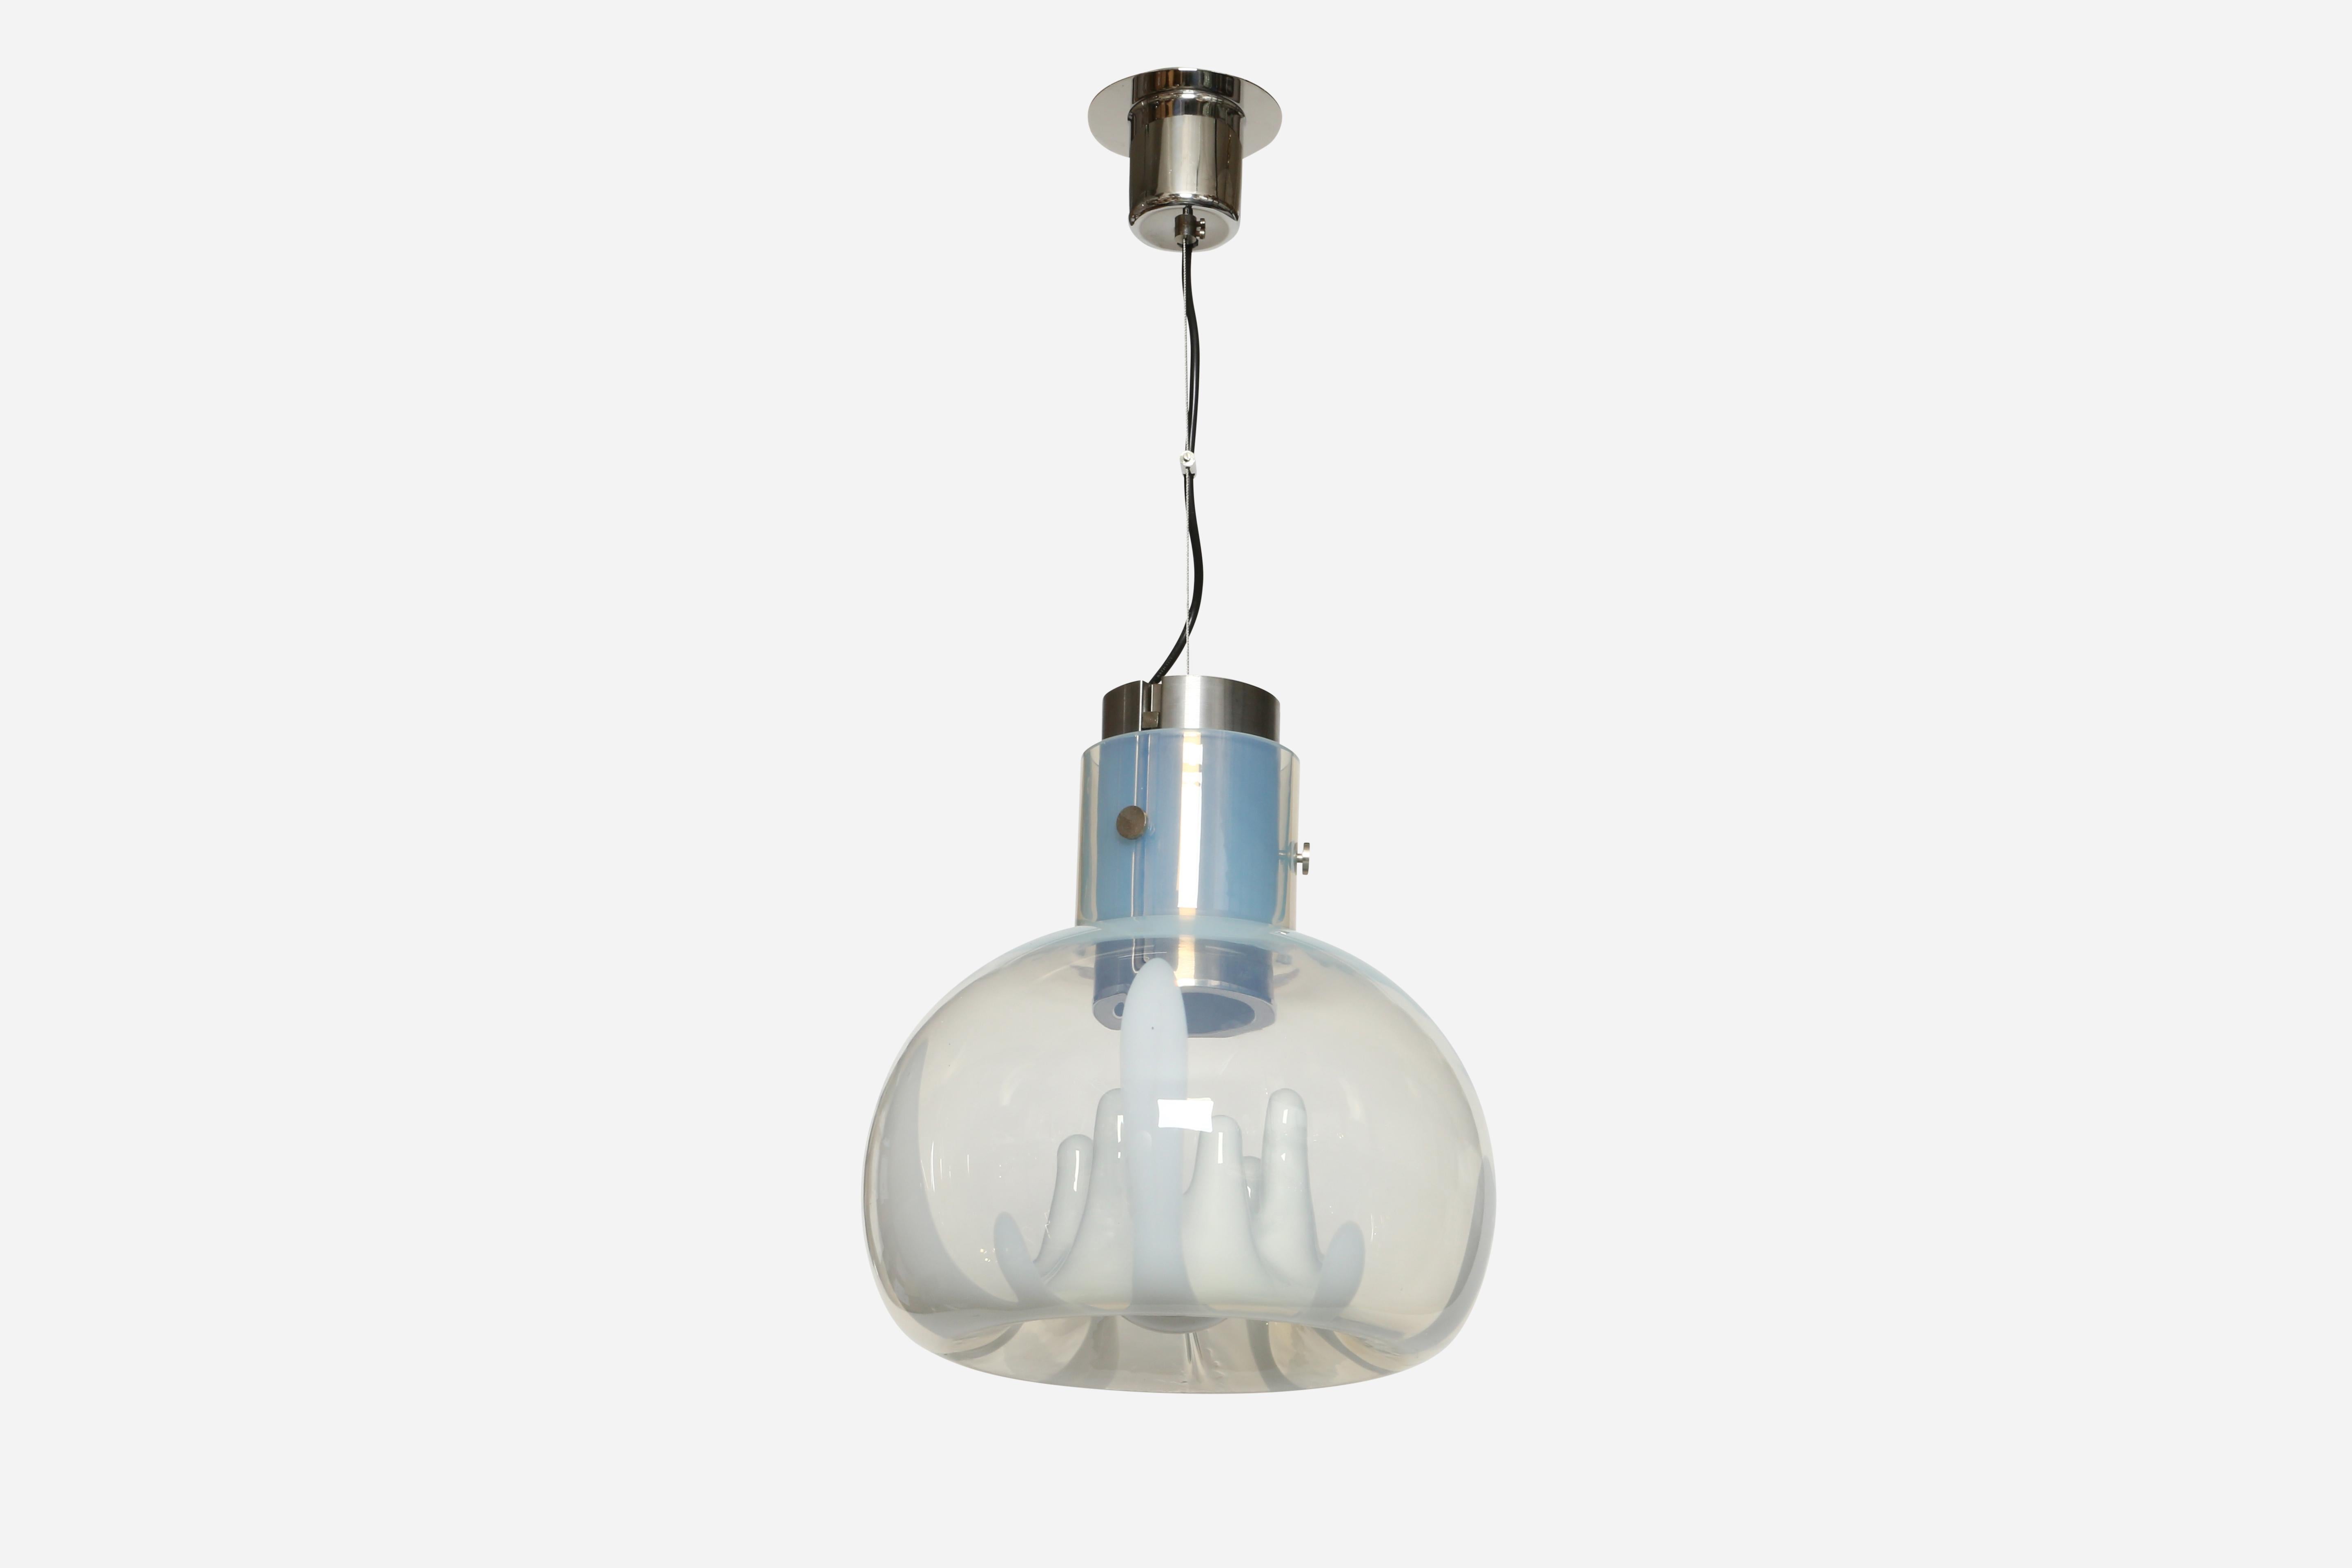 Toni Zuccheri Murano glass suspension.
Italy 1960s
Handblown glass, nickel plated metal.
Takes one medium base bulb.
Rewired for US.
Overall drop is adjustable.
Can be shorter.

We take pride in bringing vintage fixtures to their full glory